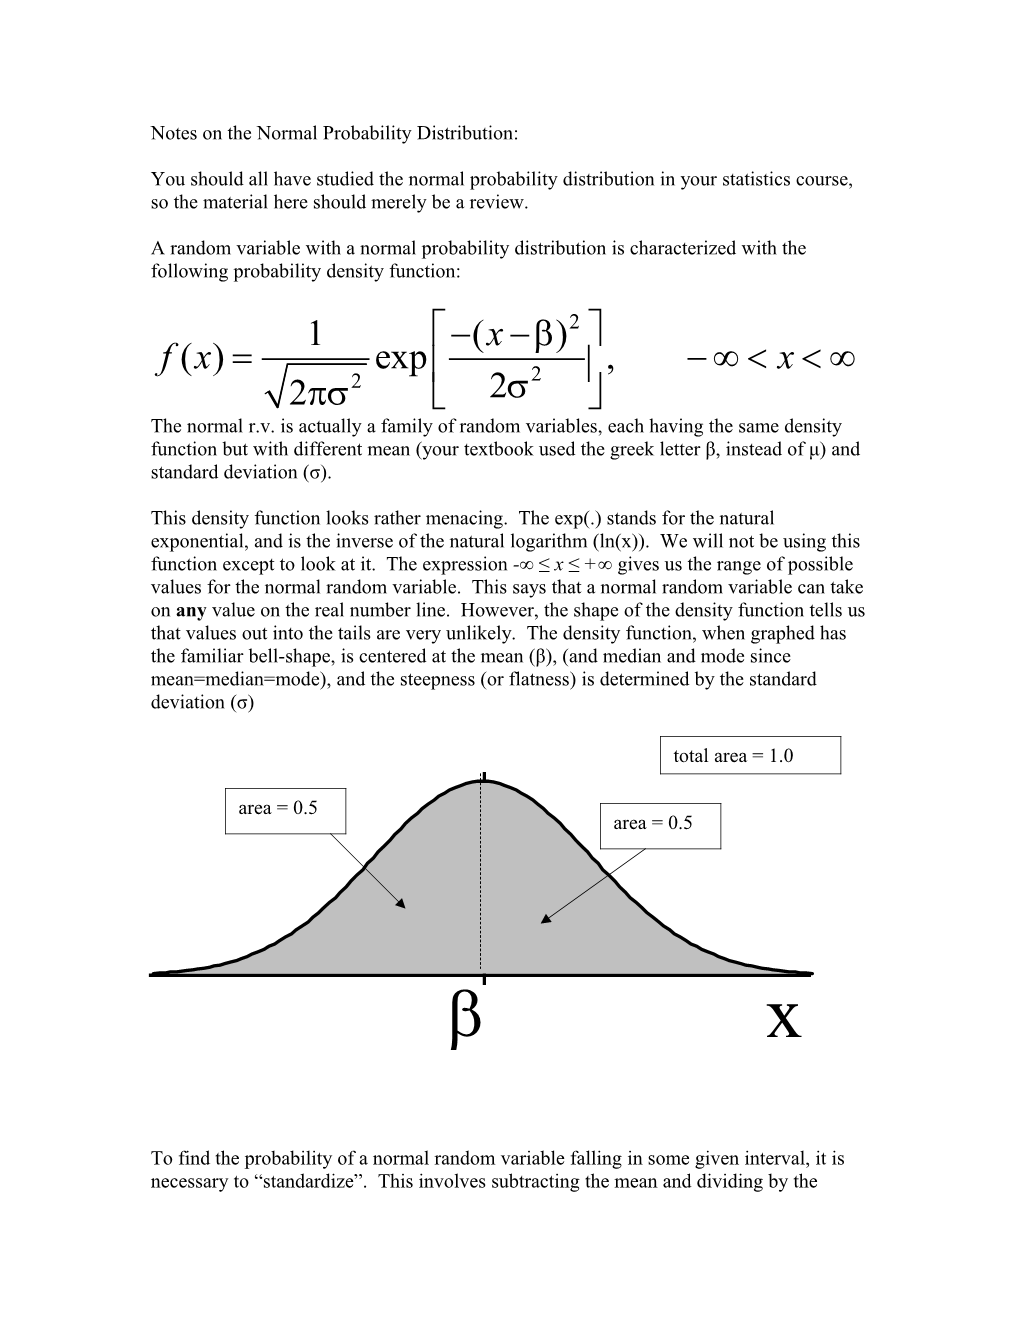 Notes on the Normal Probability Distribution